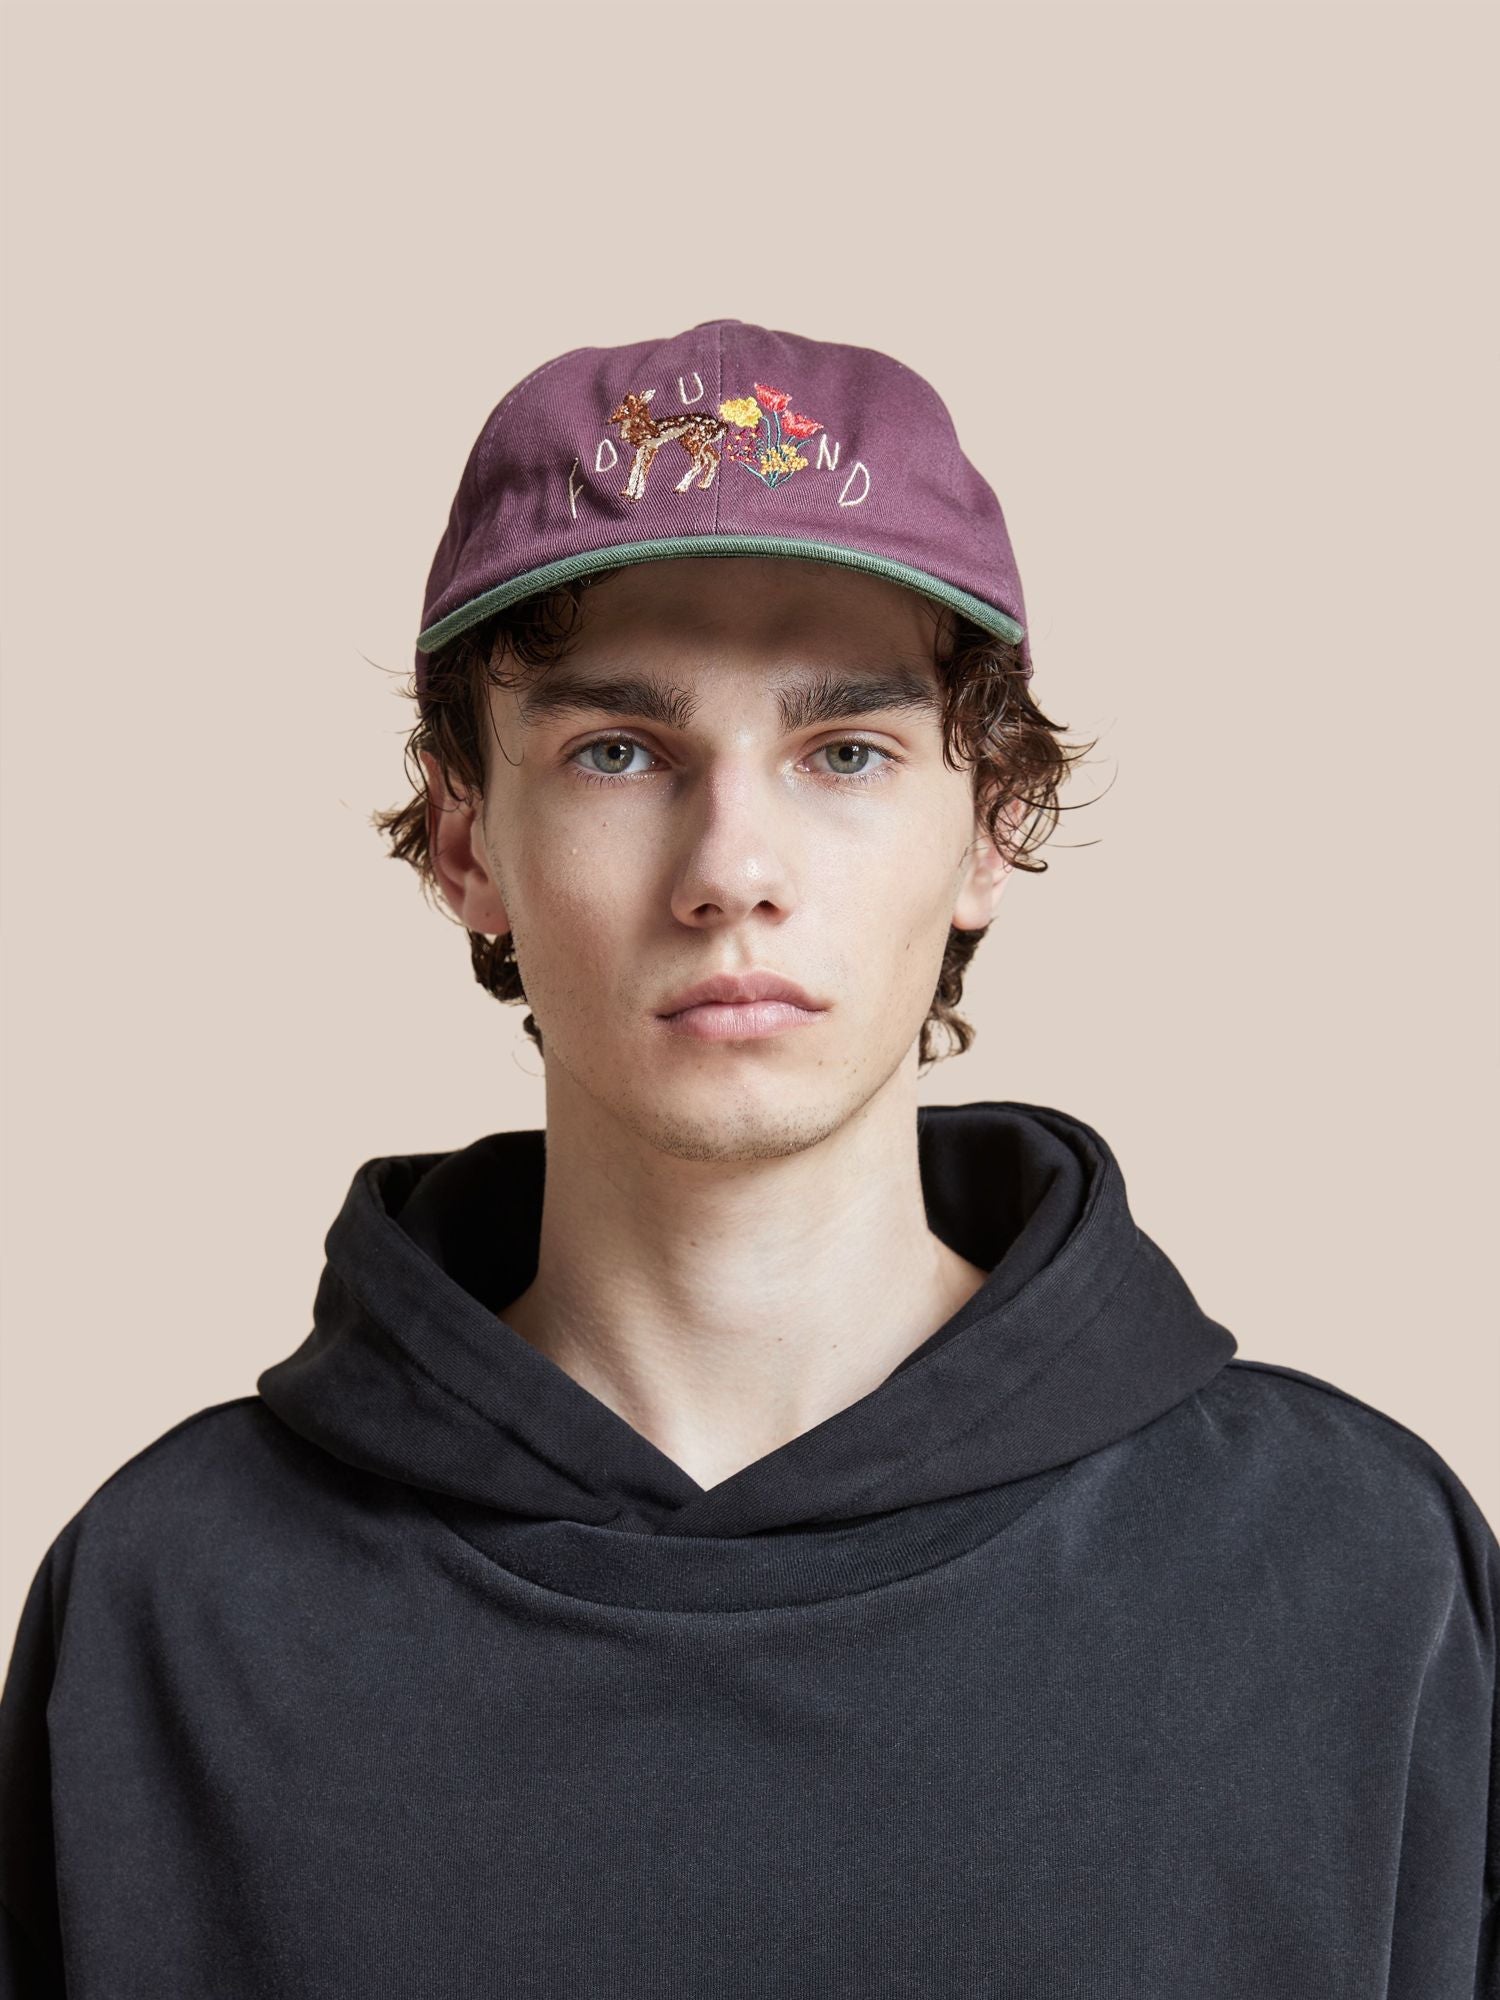 A young man wearing a maroon Found Flower Deer Cap and black hoodie, looking at the camera with a neutral expression on a light pink background.